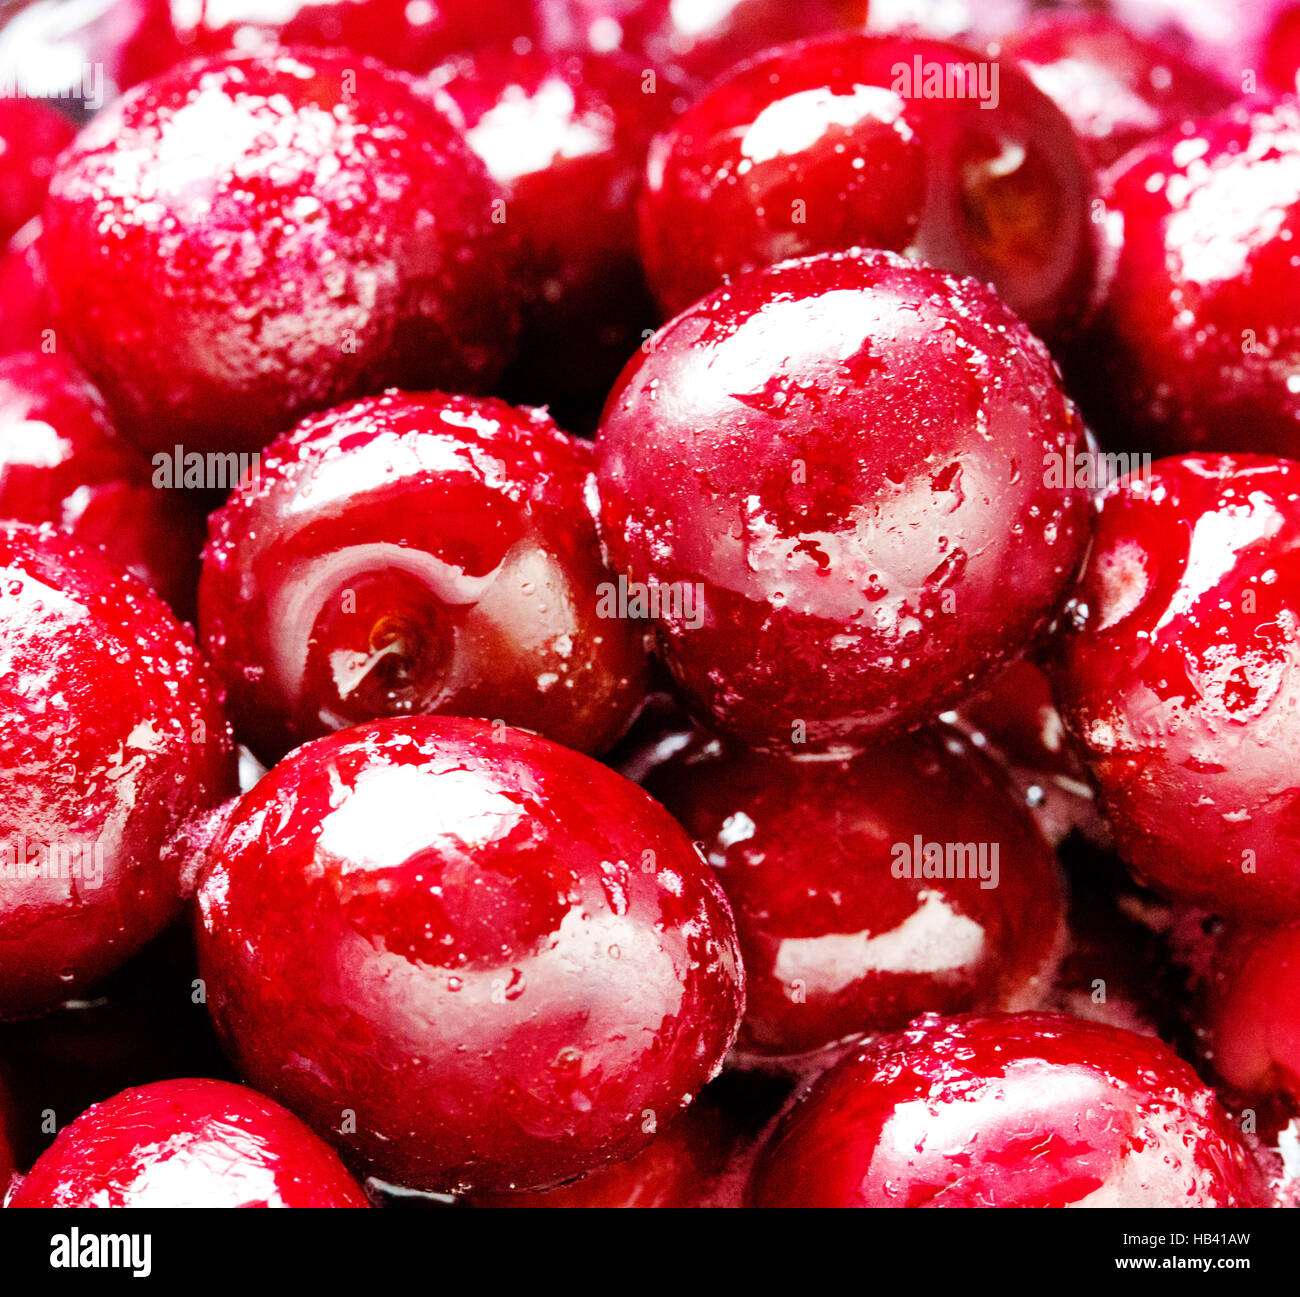 Cherries with pits in sugar syrup. Stock Photo